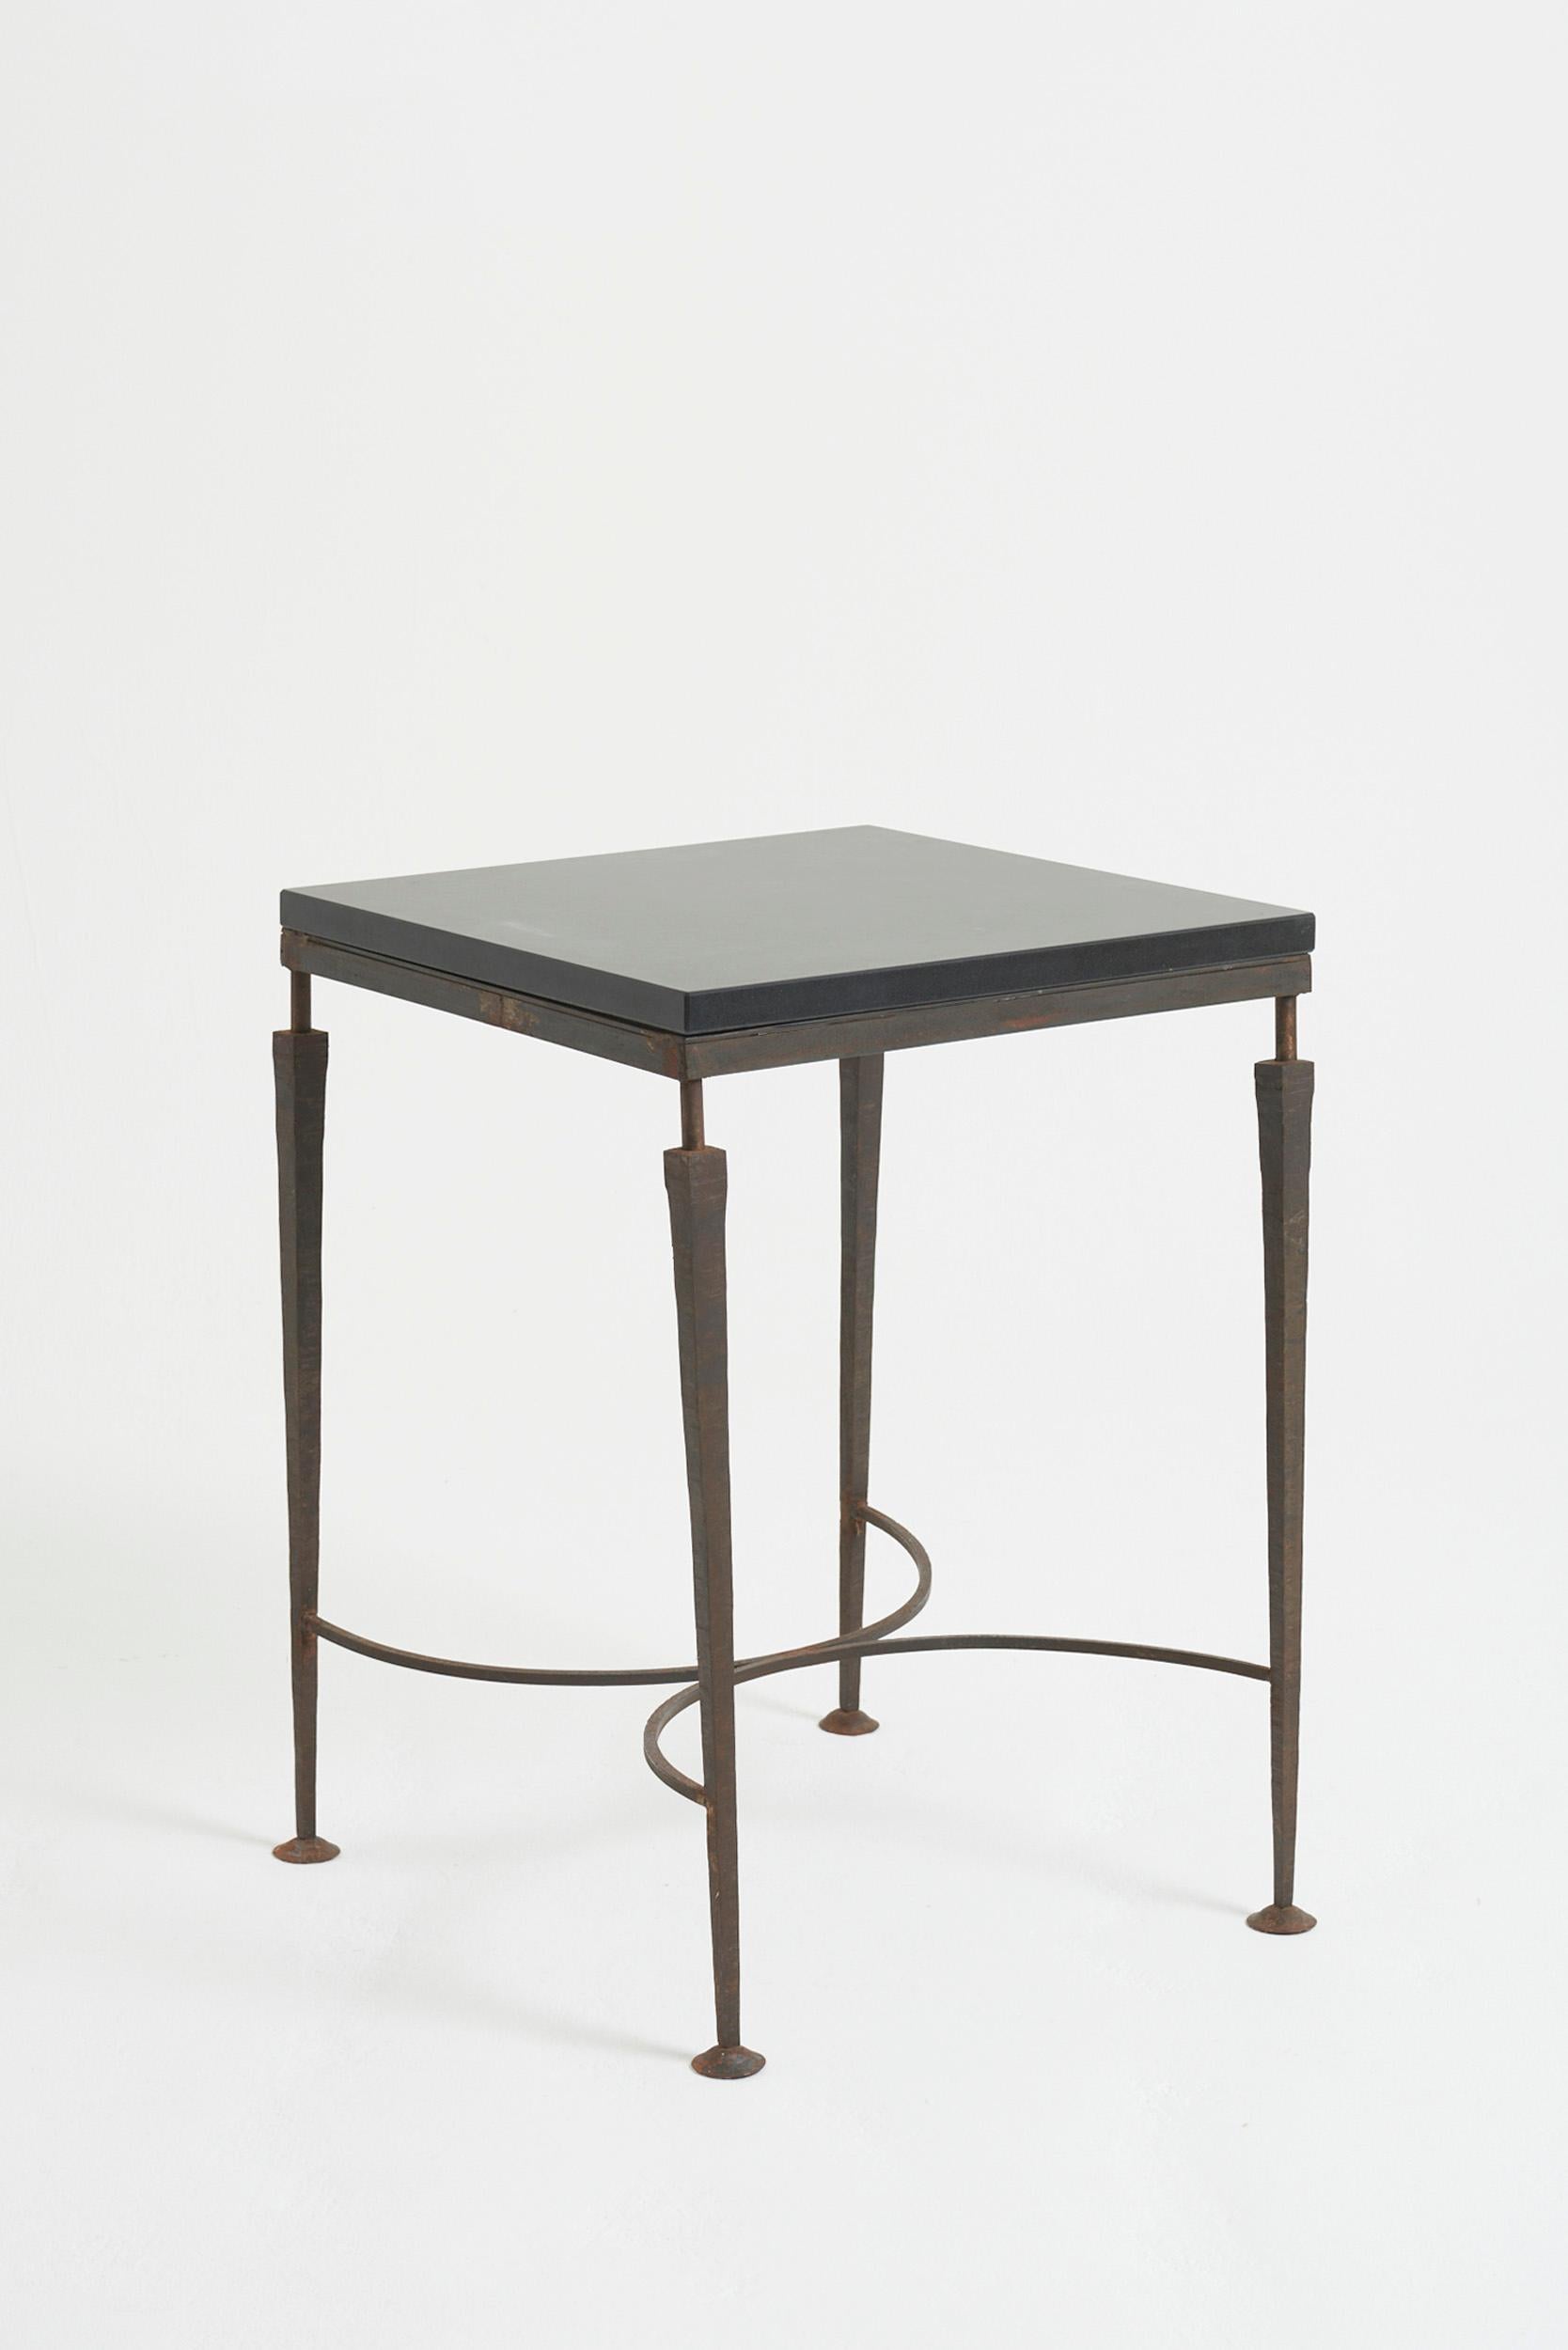 A wrought iron and black stone top square table
France, second half of the 20th Century